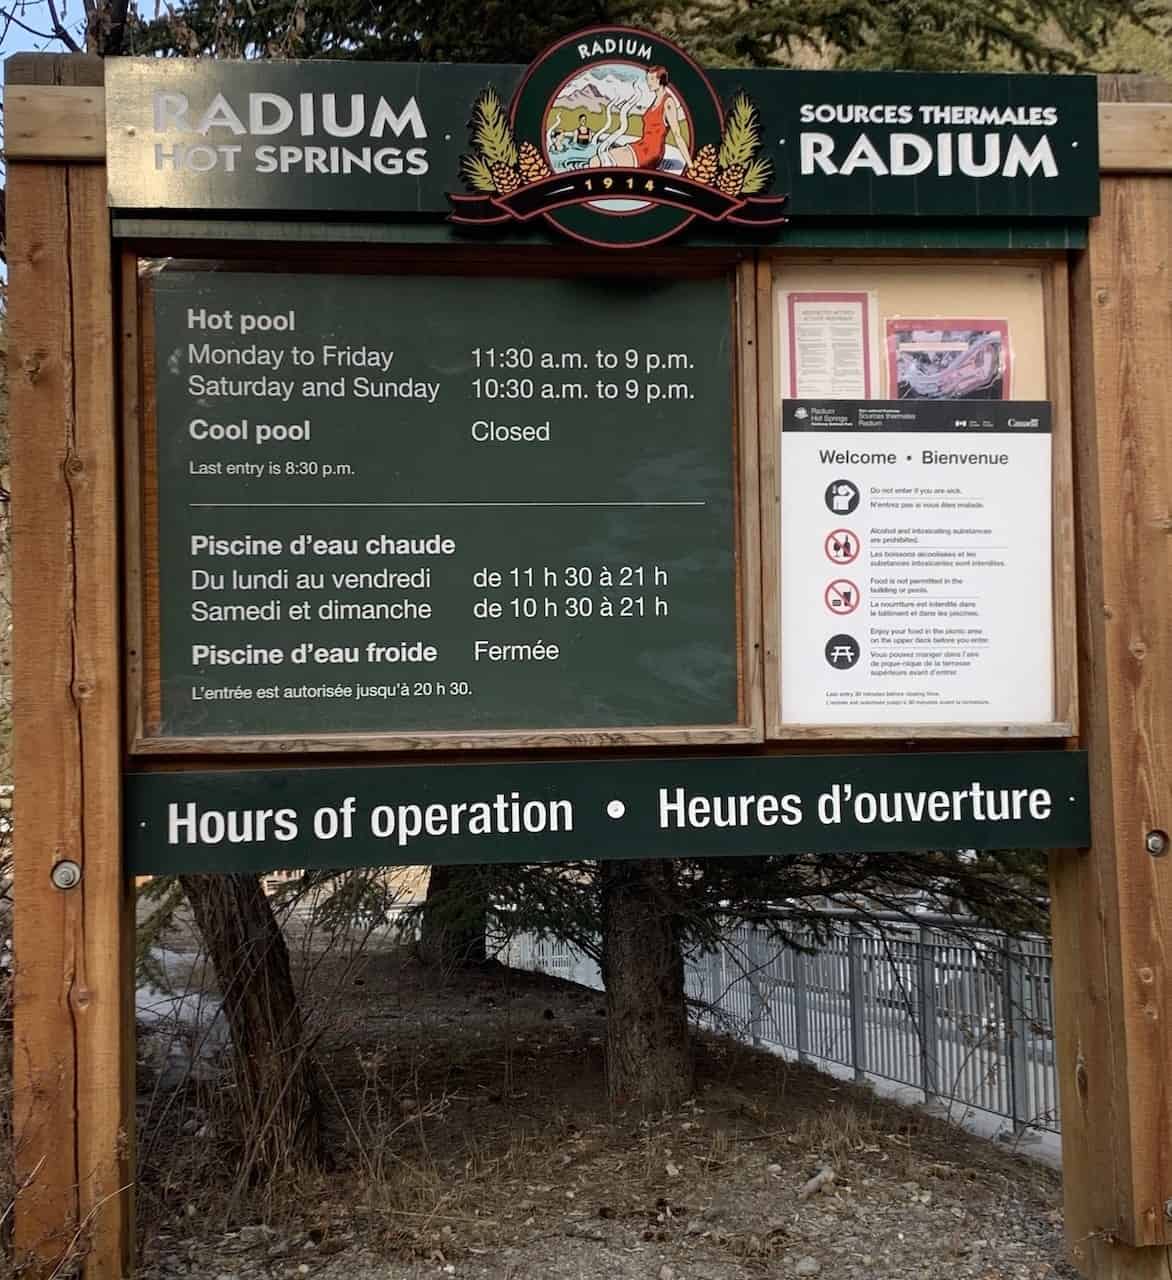 Visitor Information Sign at Radium Hot Springs British Columbia - Hours of operation and information is posted on a sign near the park entrance at Radium Hot Springs Pools in British Columbia, Canada.